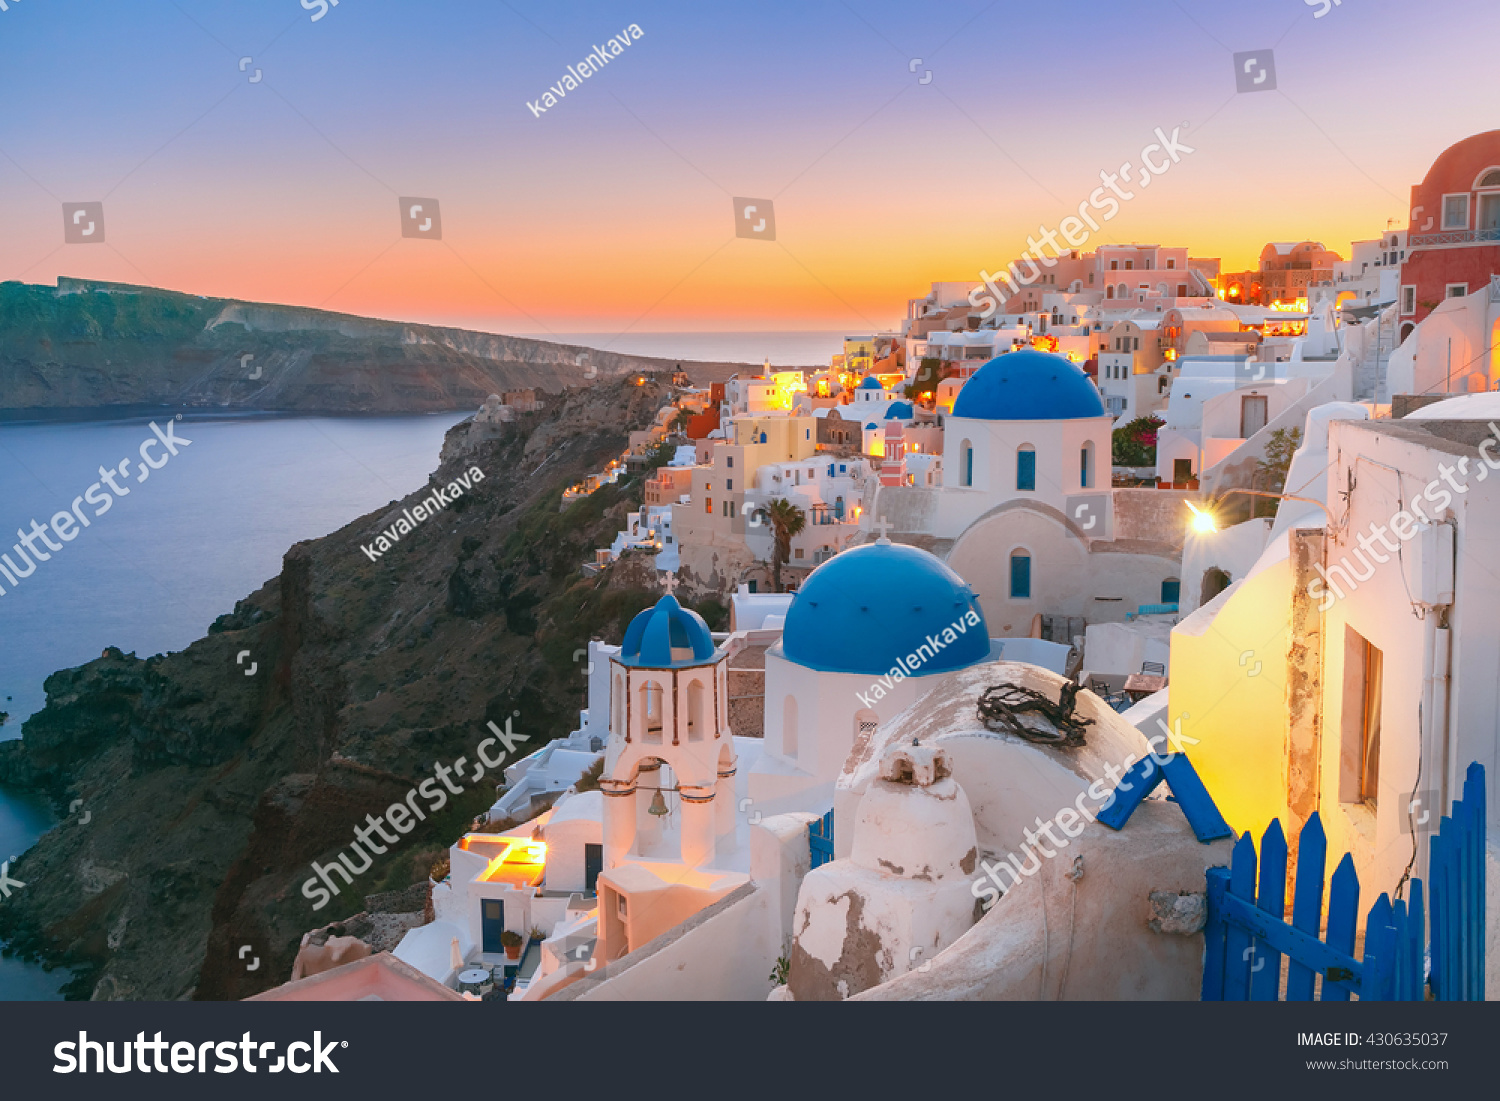 Picturesque view, Old Town of Oia or Ia on the island Santorini, white houses and church with blue domes at sunset, Greece #430635037